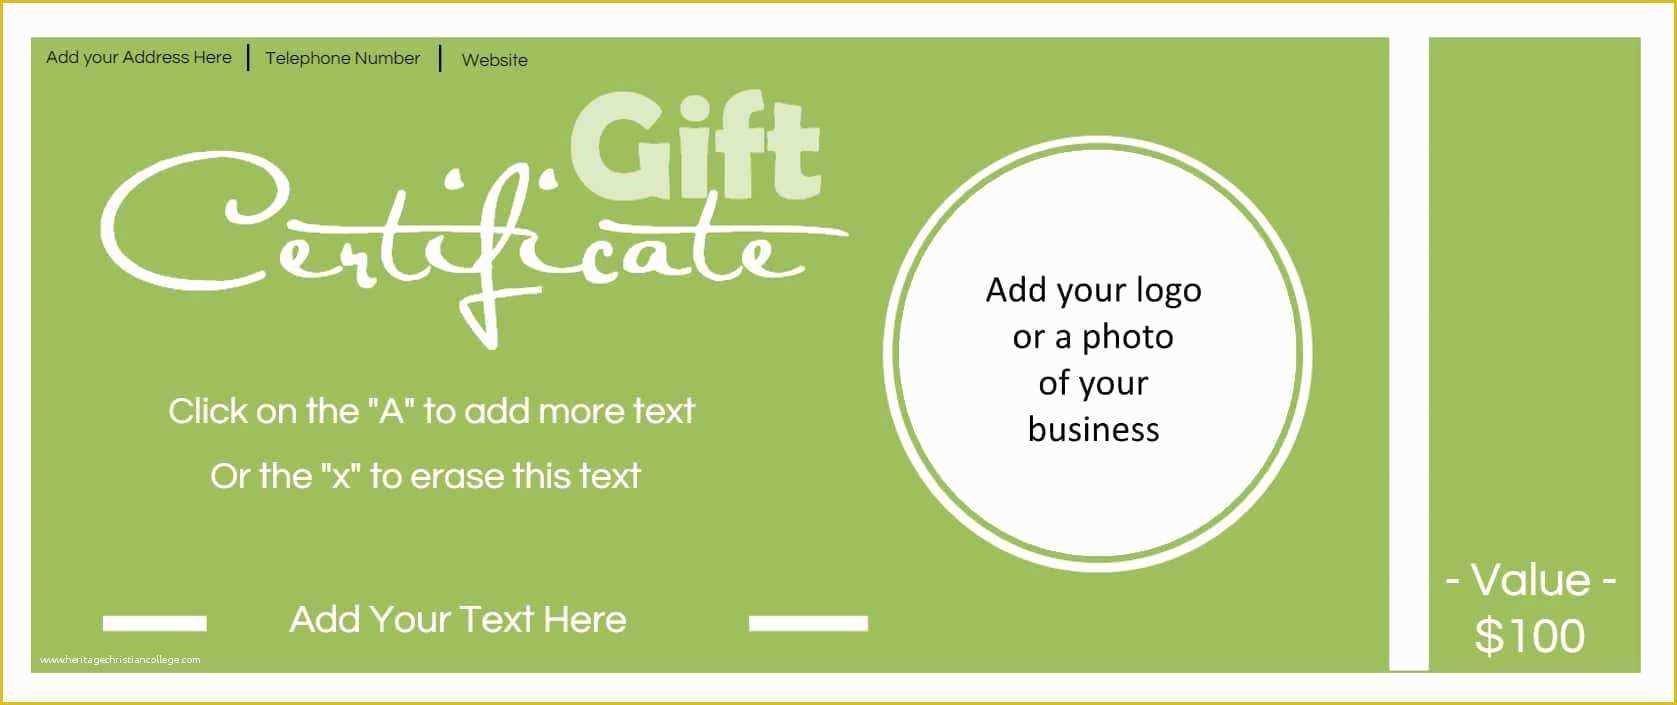 Free Business License Template Of Gift Certificate Template with Logo